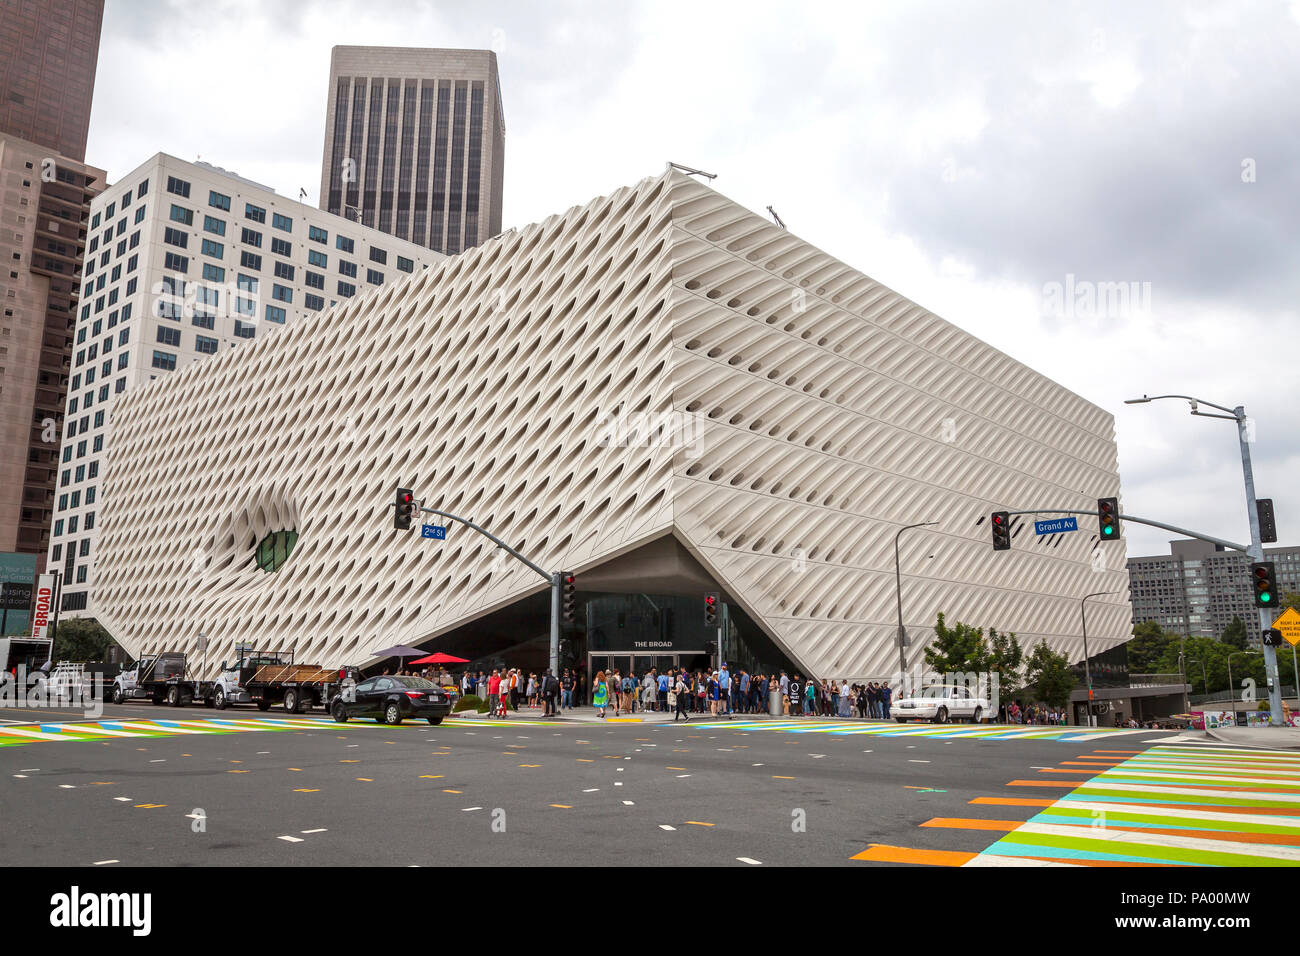 The Broad, a contemporary art museum in Los Angeles, California, USA Stock Photo